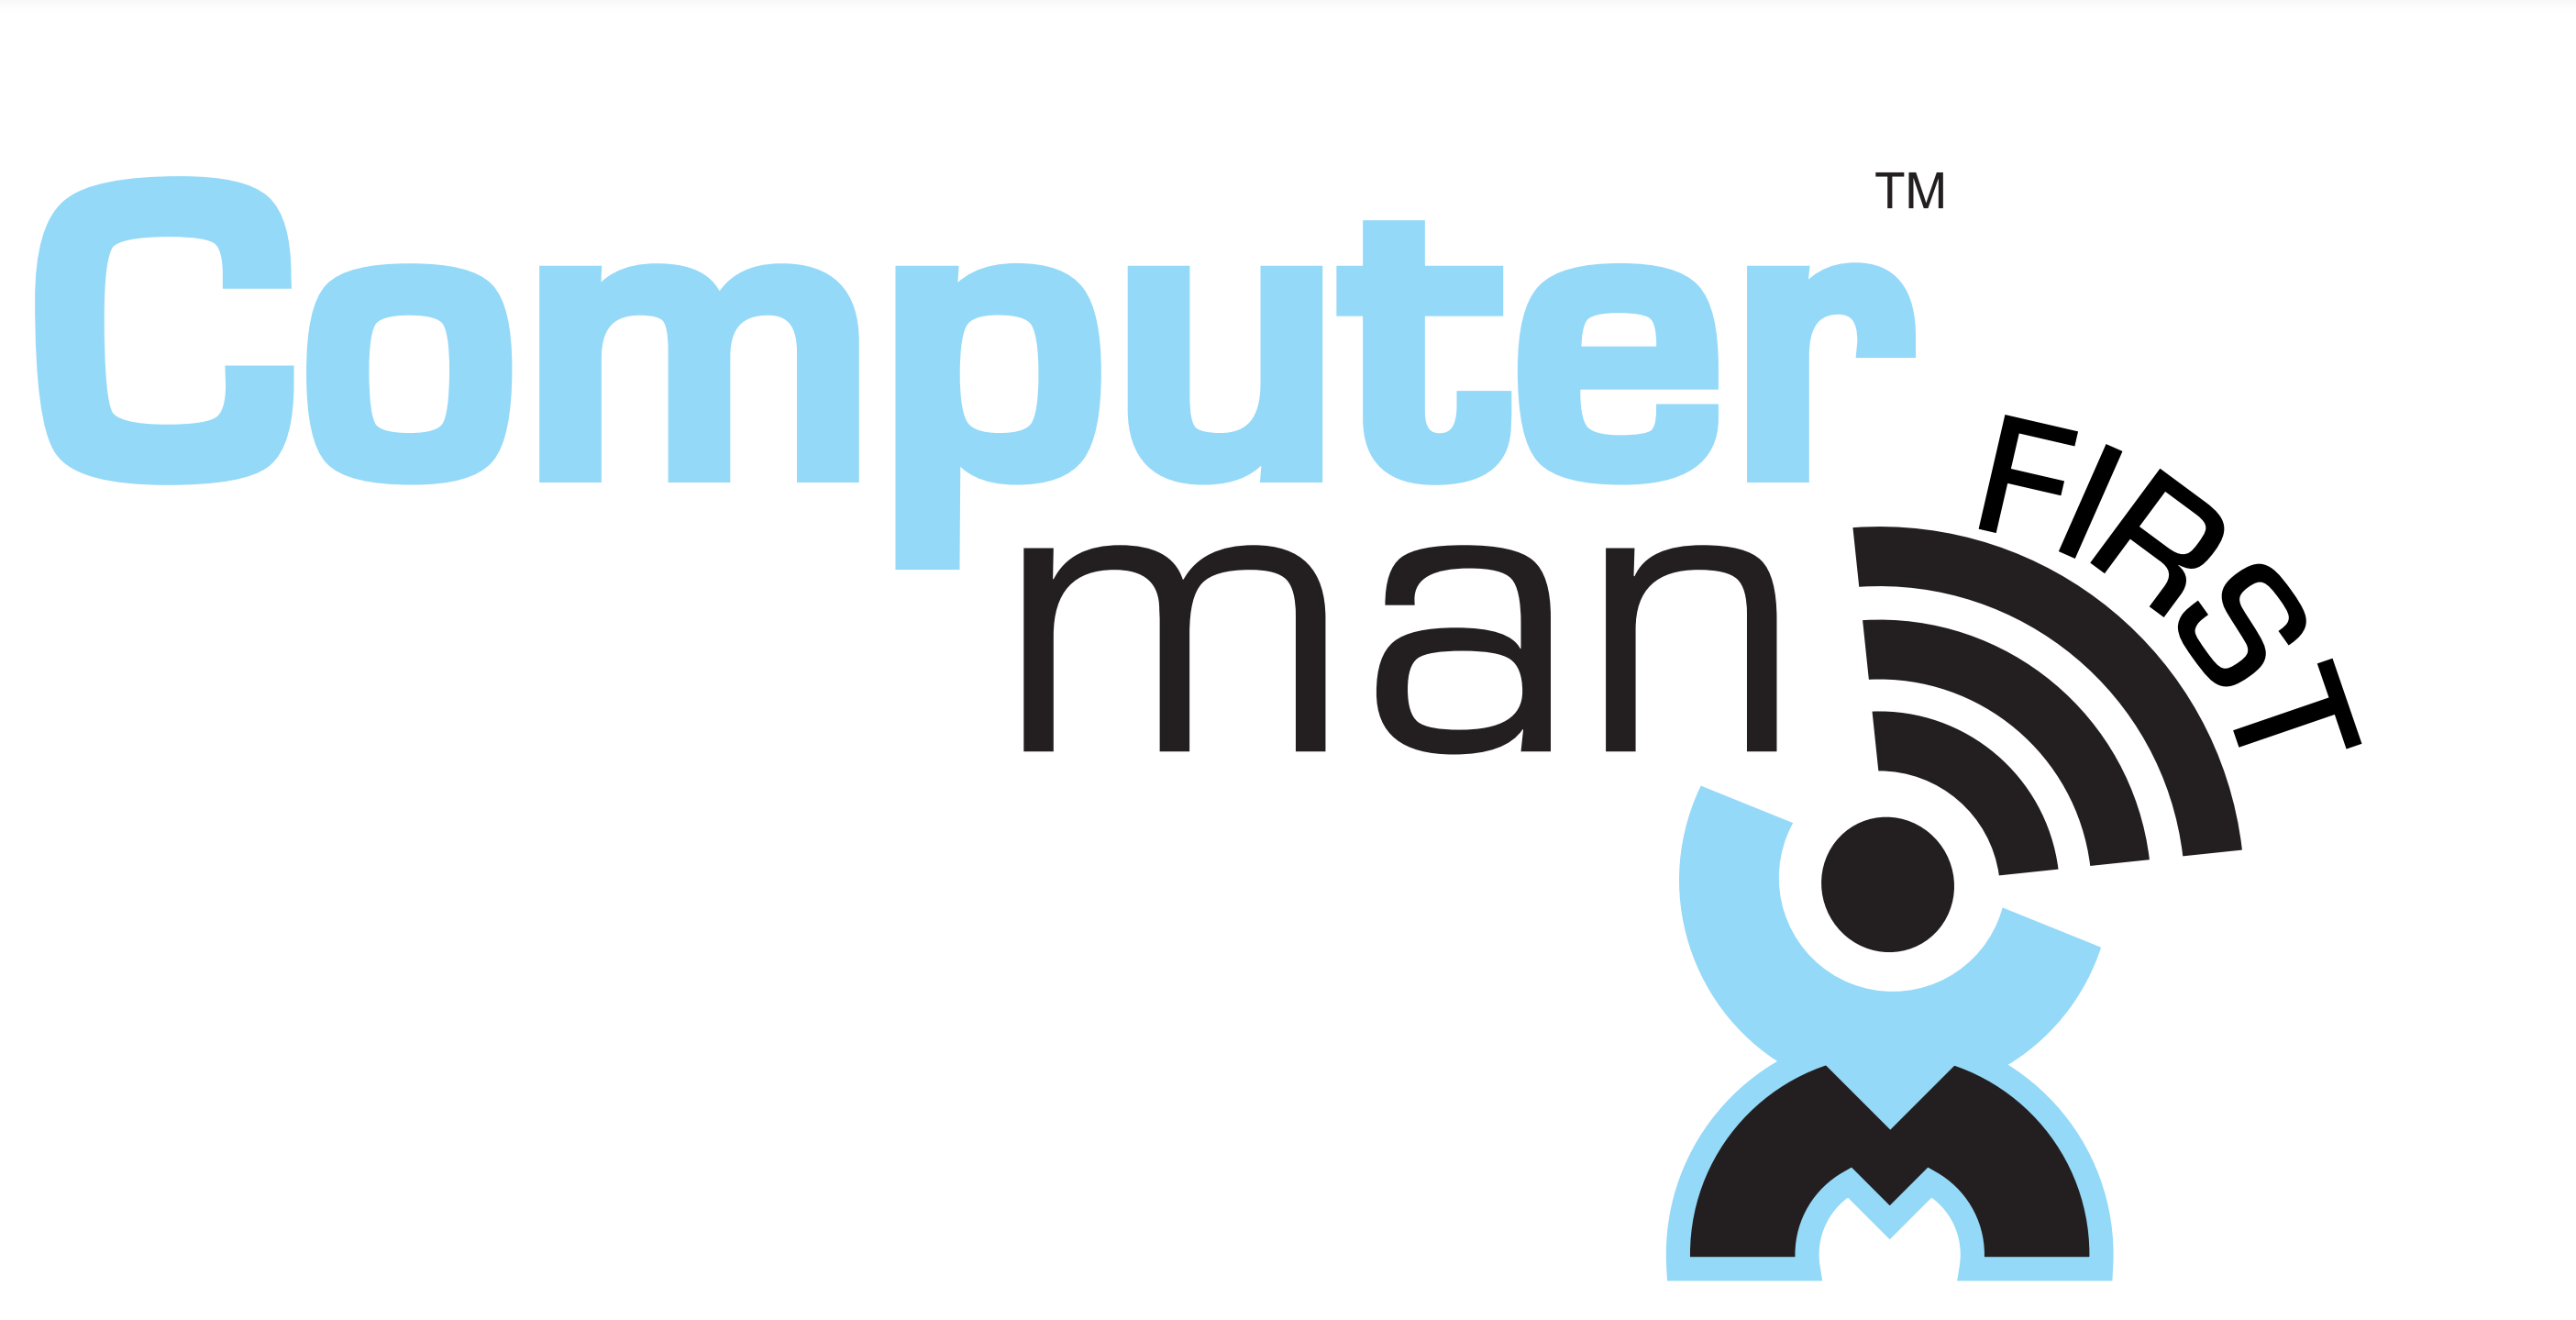 Computermanfirst's logo of a man made from an M for his legs and a C for his torso with wifi bars radiating from his head